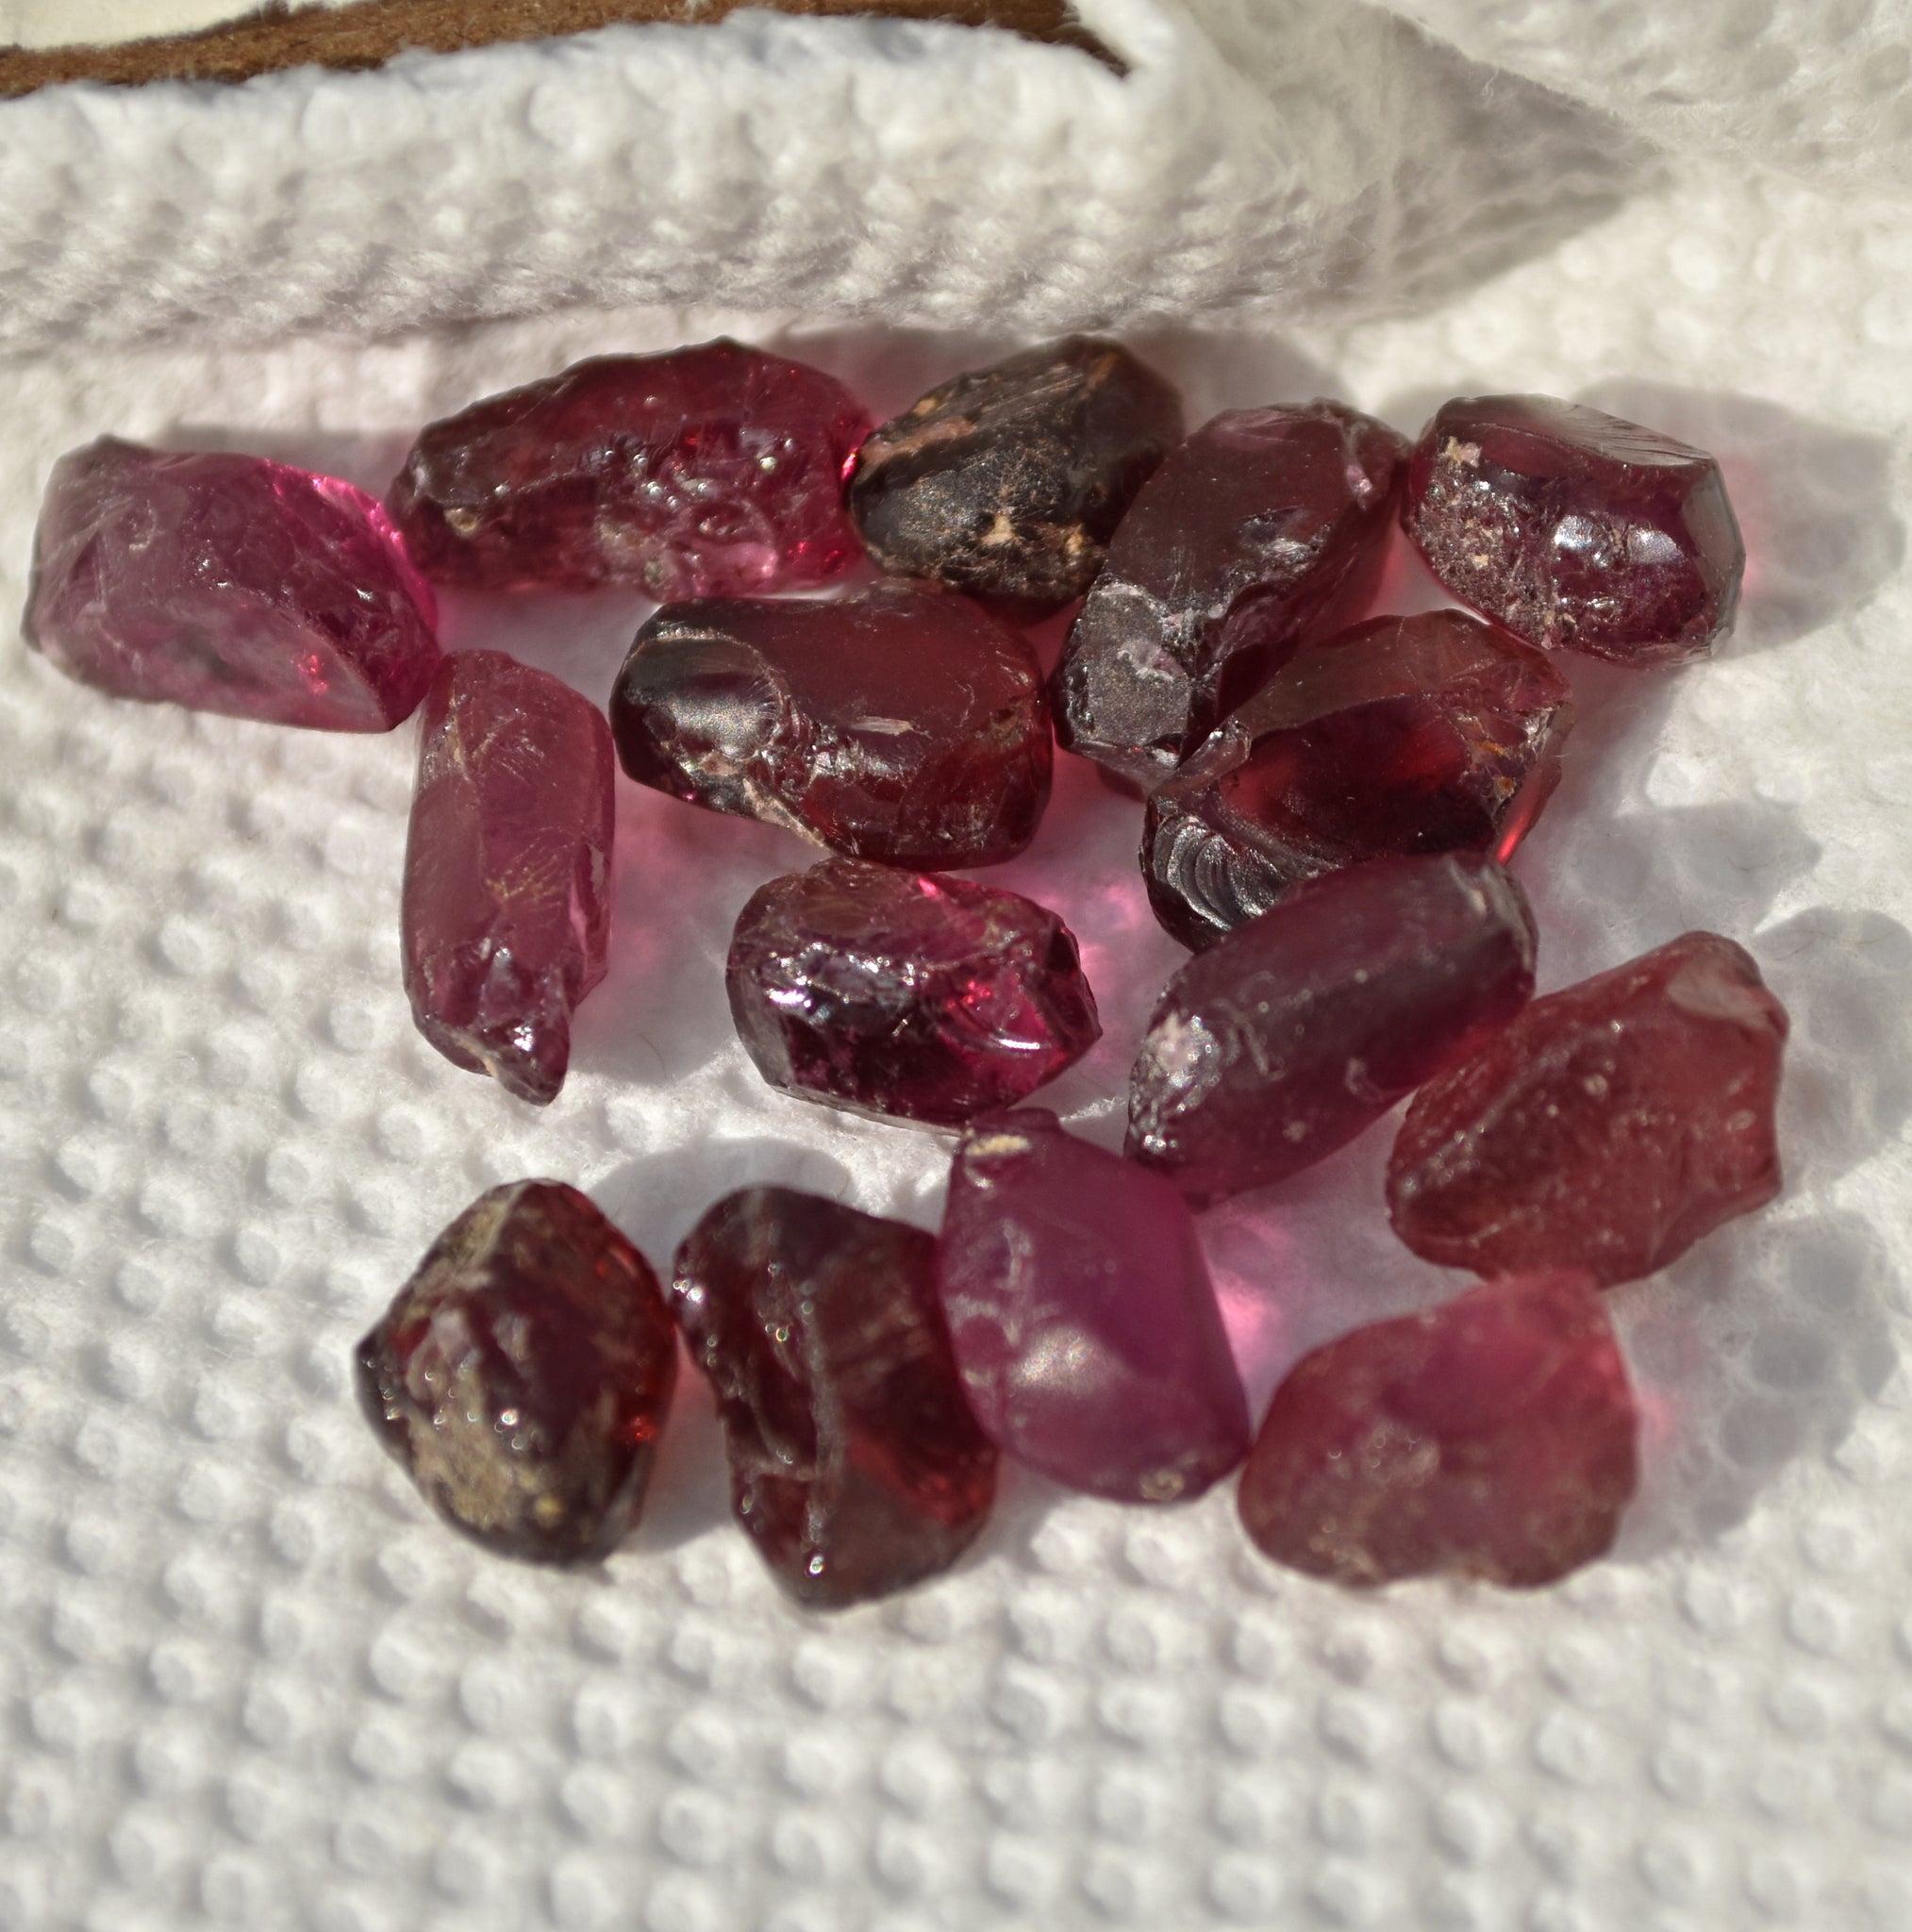  50 carats Natural Raw Rhodolite Garnet Stone, Tiny Rough for  Jewelry Making, Wire Wrapping Wholesale Gemstone Lot, Healing Crystals,  January Birthstone, DIY Gift : Handmade Products